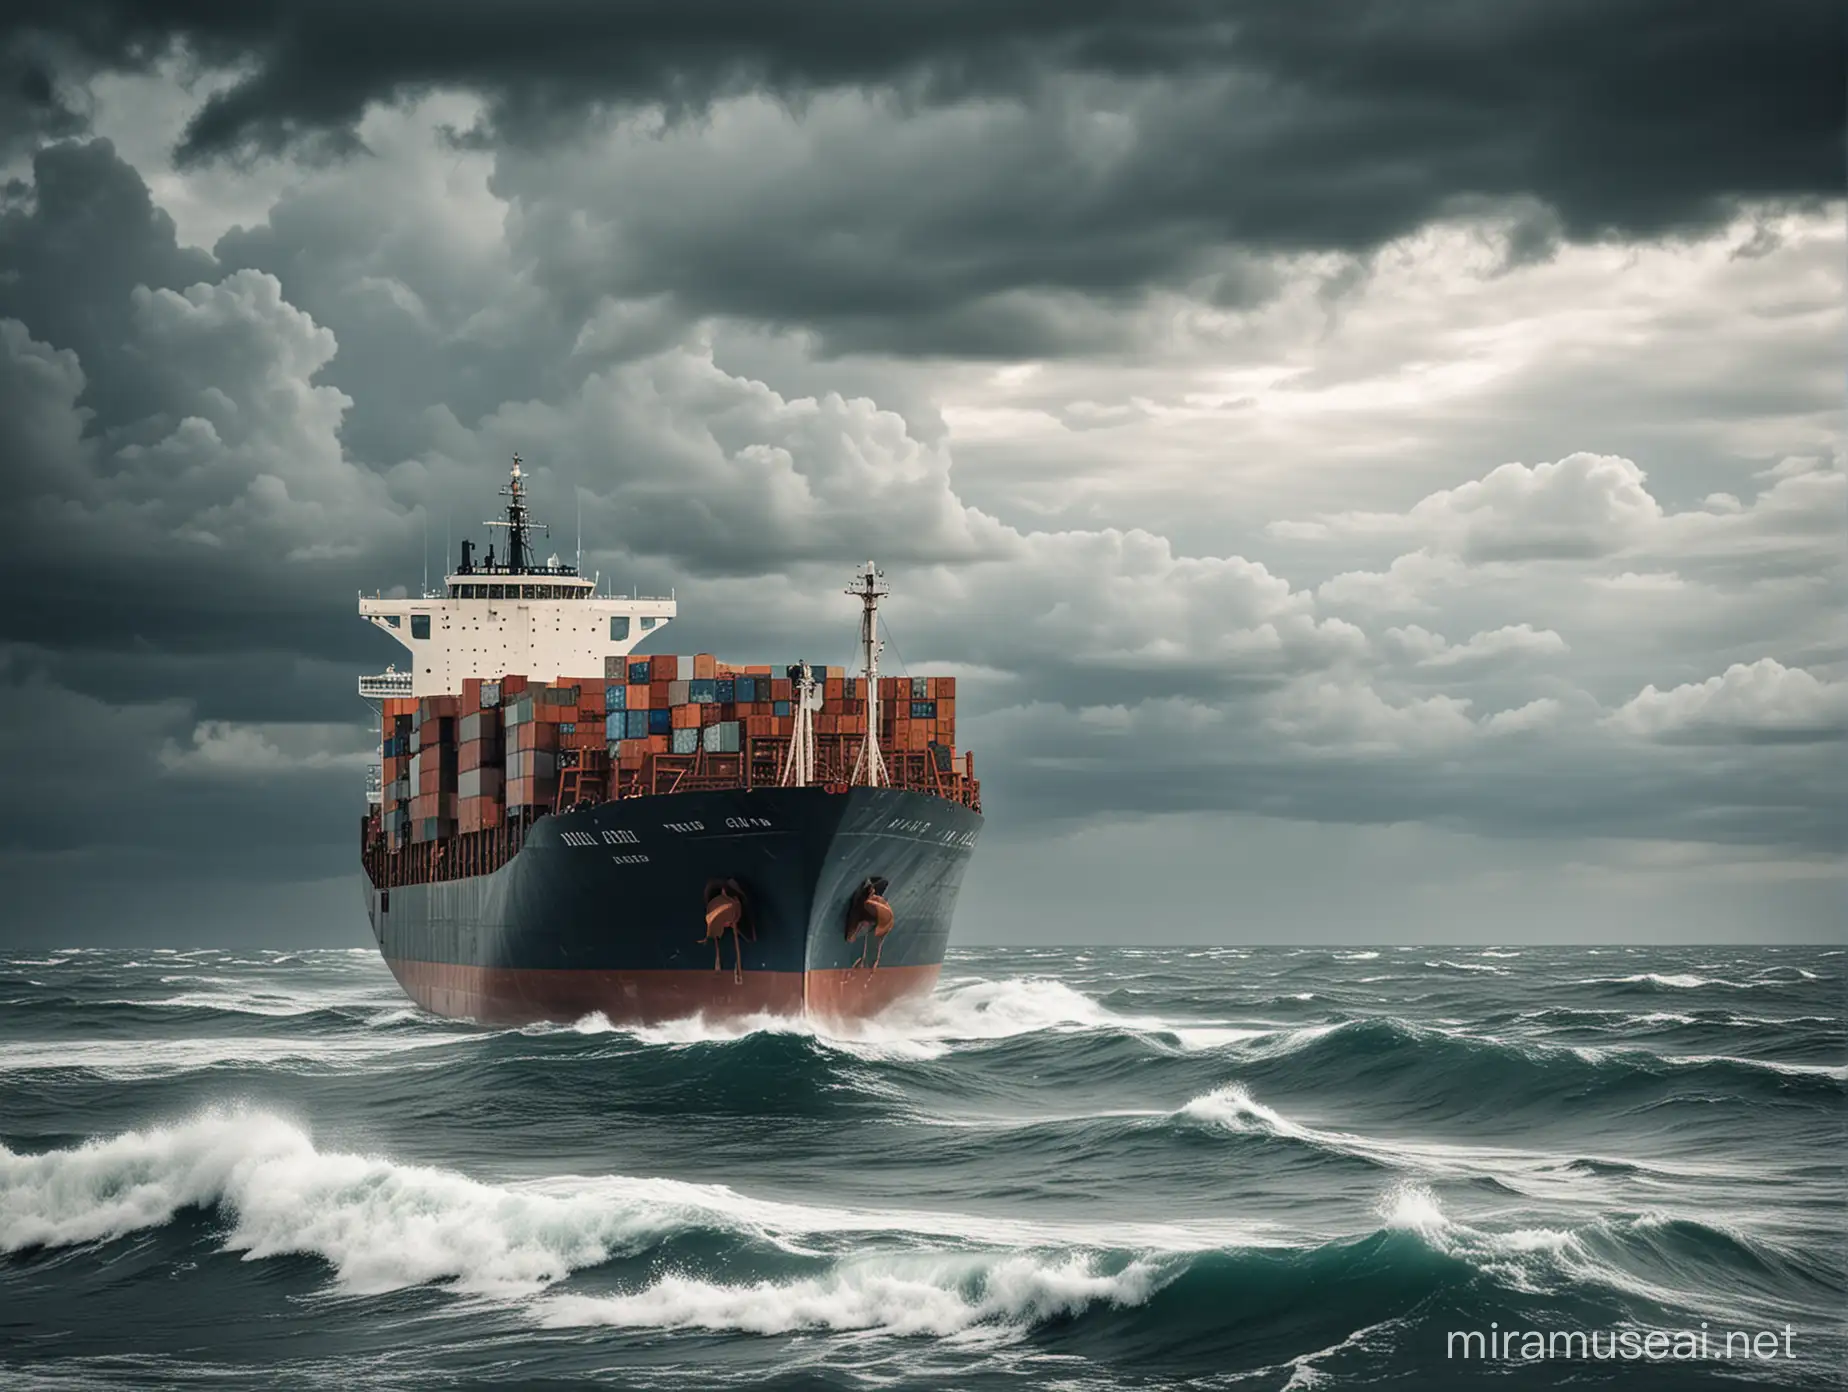 create a photo of a cargo ship sailing on  a rough ocean and with cloudy skies